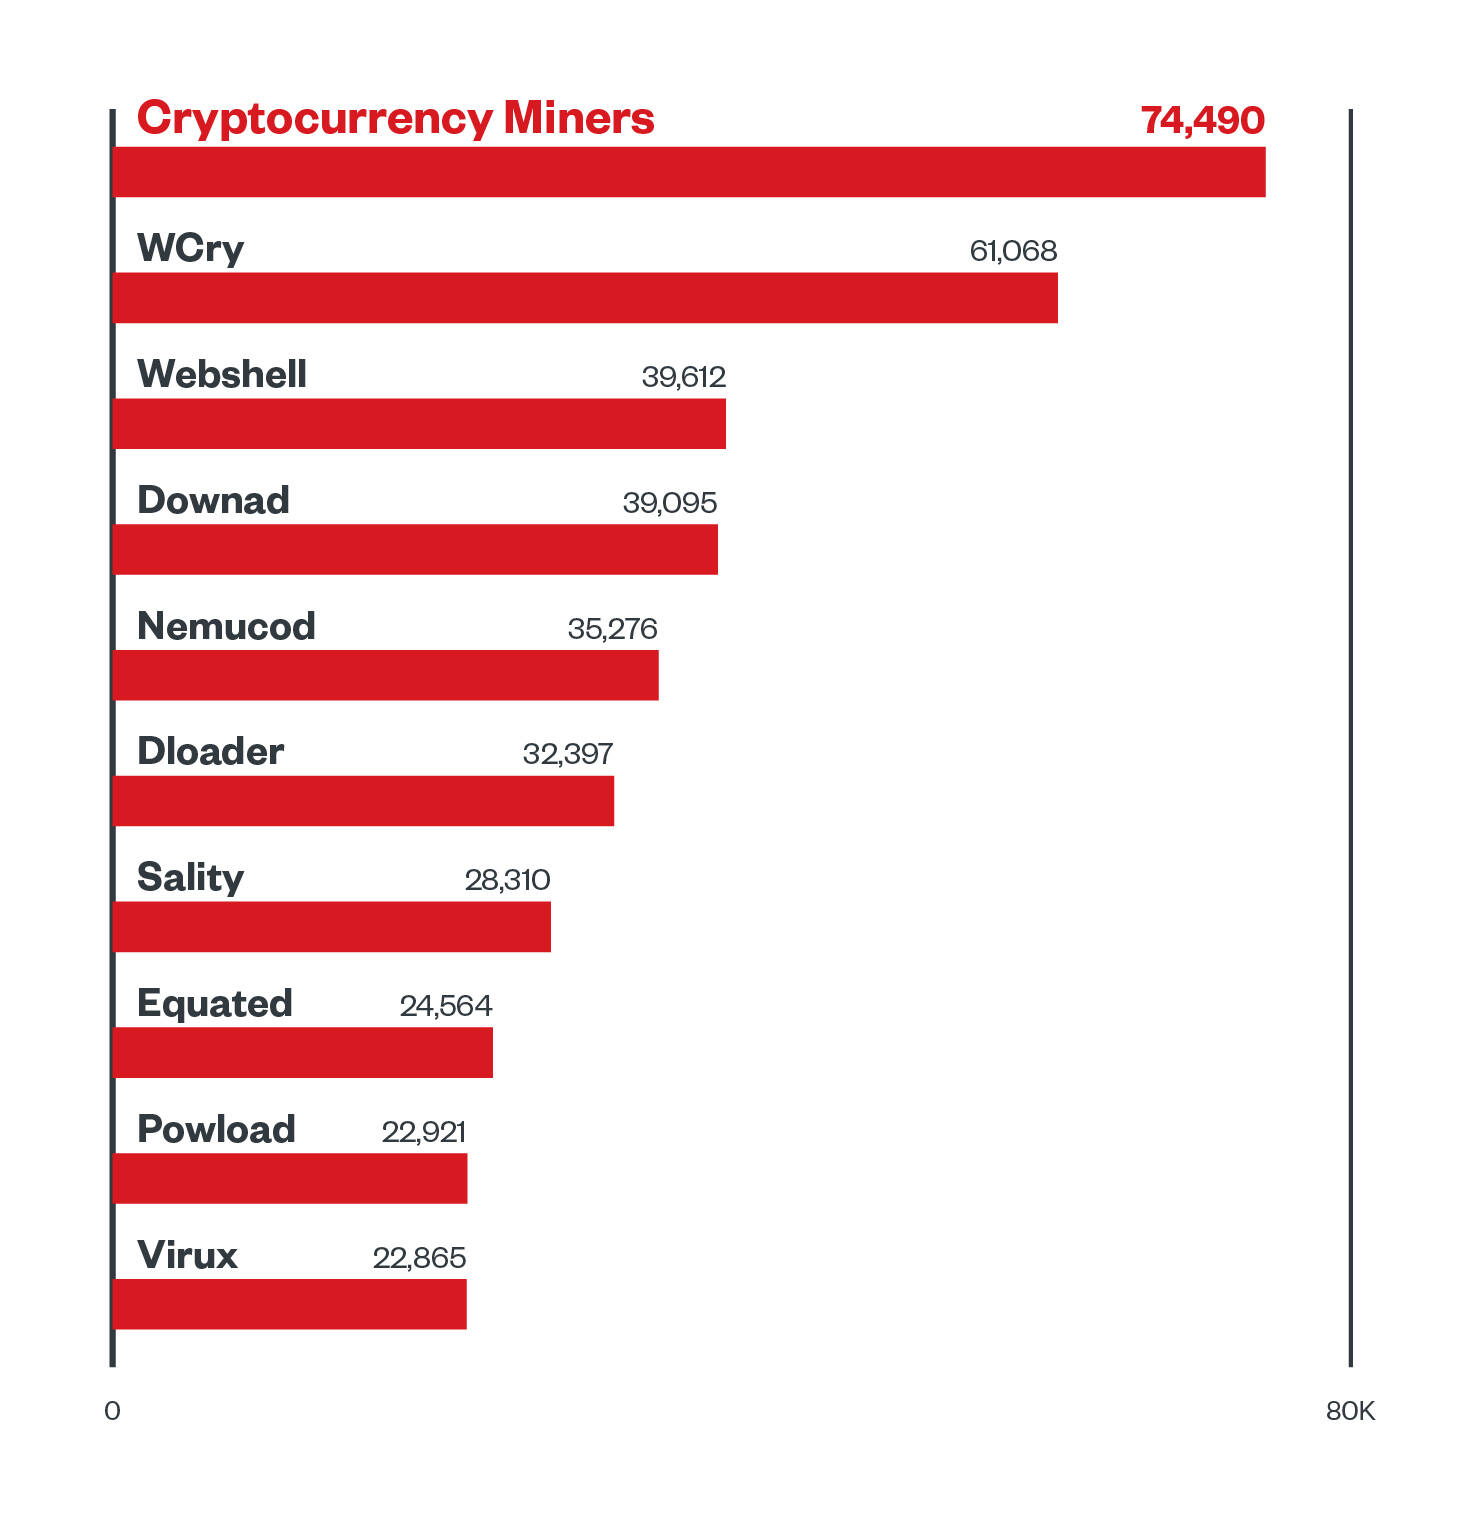 Figure 8. Cryptocurrency miners were the most detected malware, with long-running family WannaCry in the second spot: The 10 most detected malware families in the first half of 2021